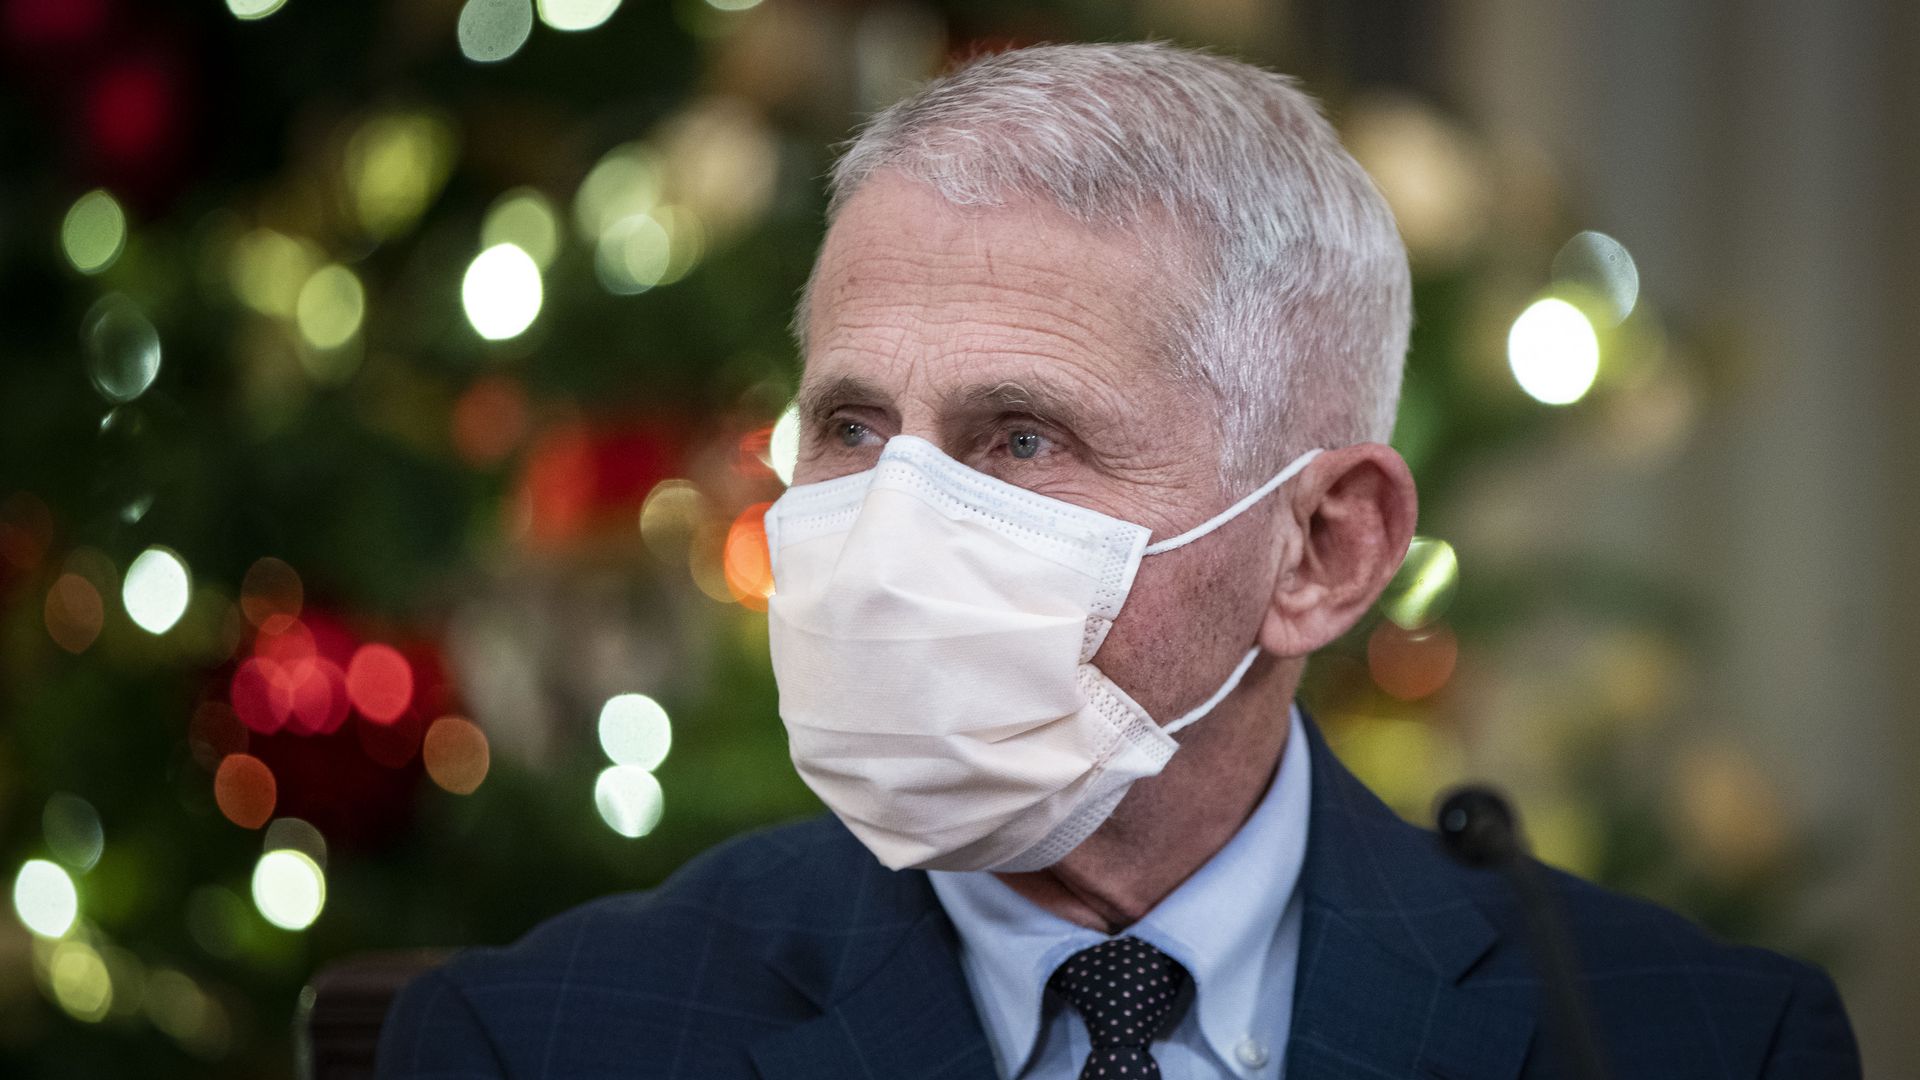 Dr. Anthony Fauci wearing a mask at a White House briefing with Christmas lights behind him